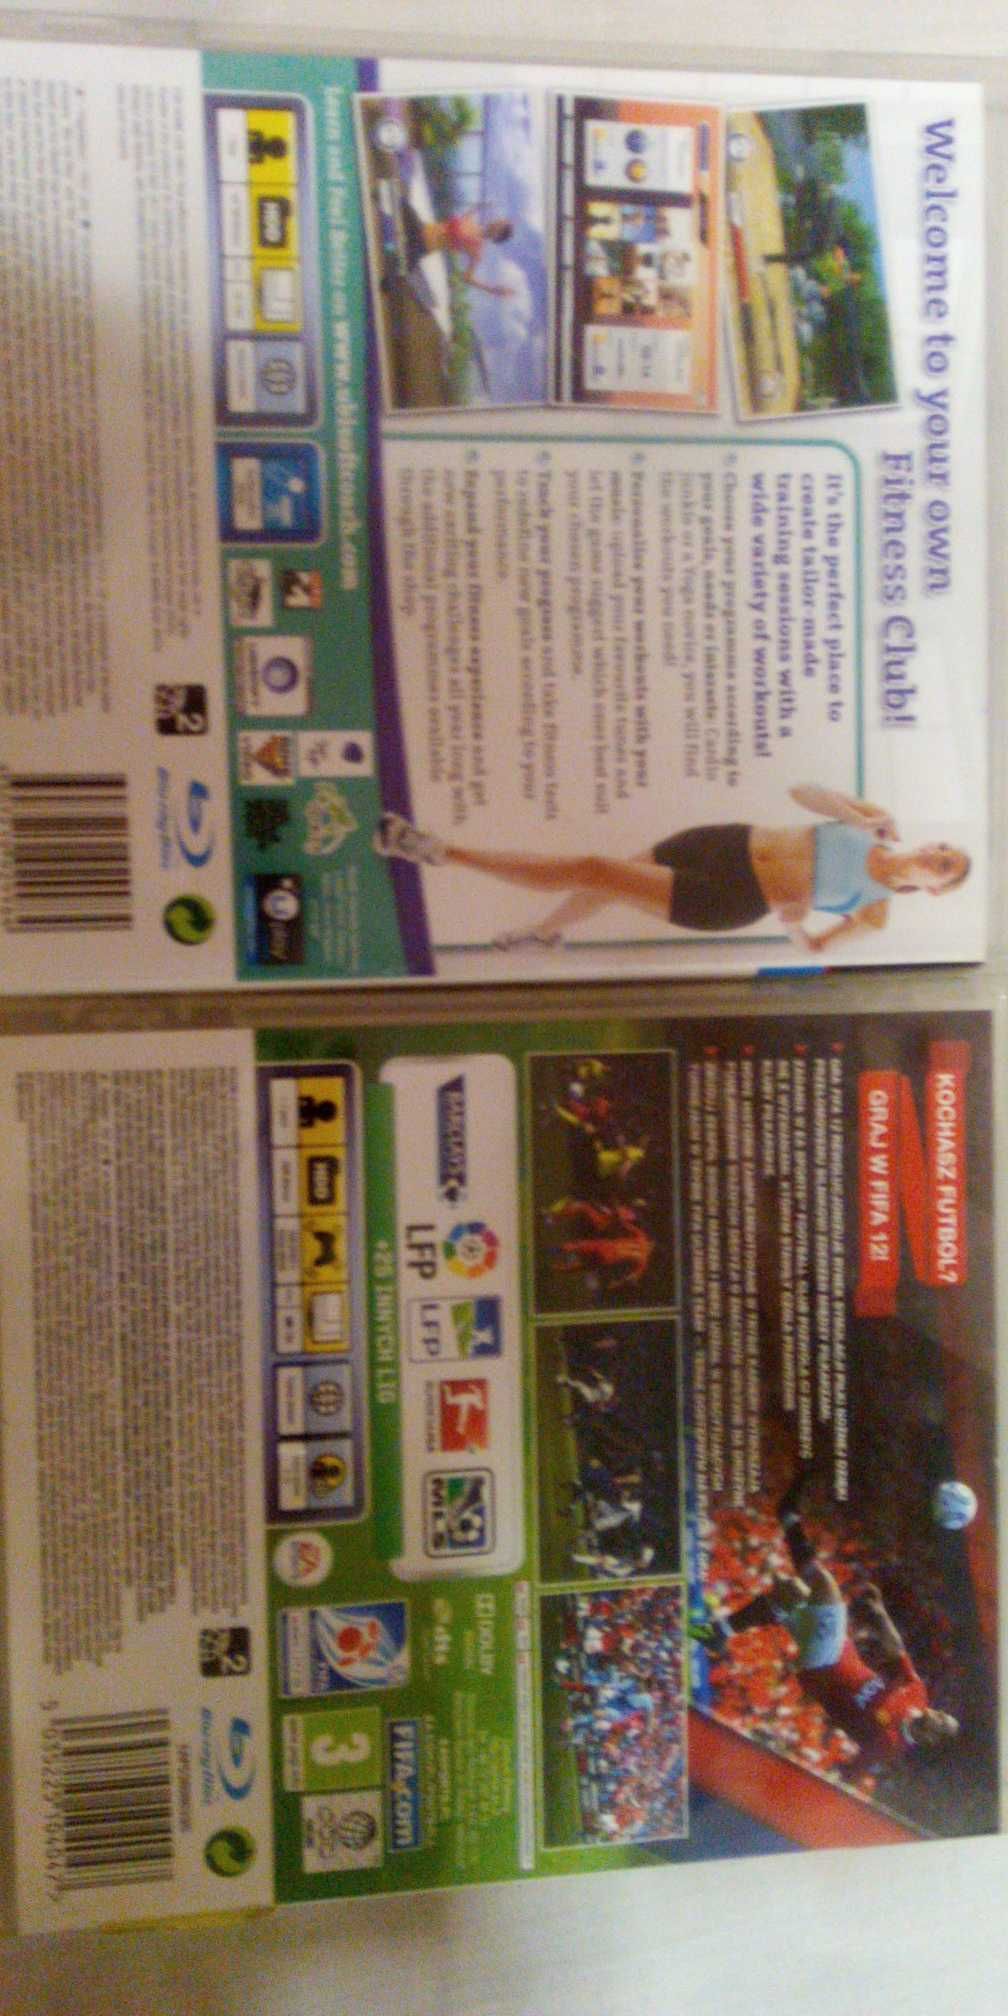 My Fitness Coach Club PS3 + FIFA 12 PS3 komplet 2 gry PS3